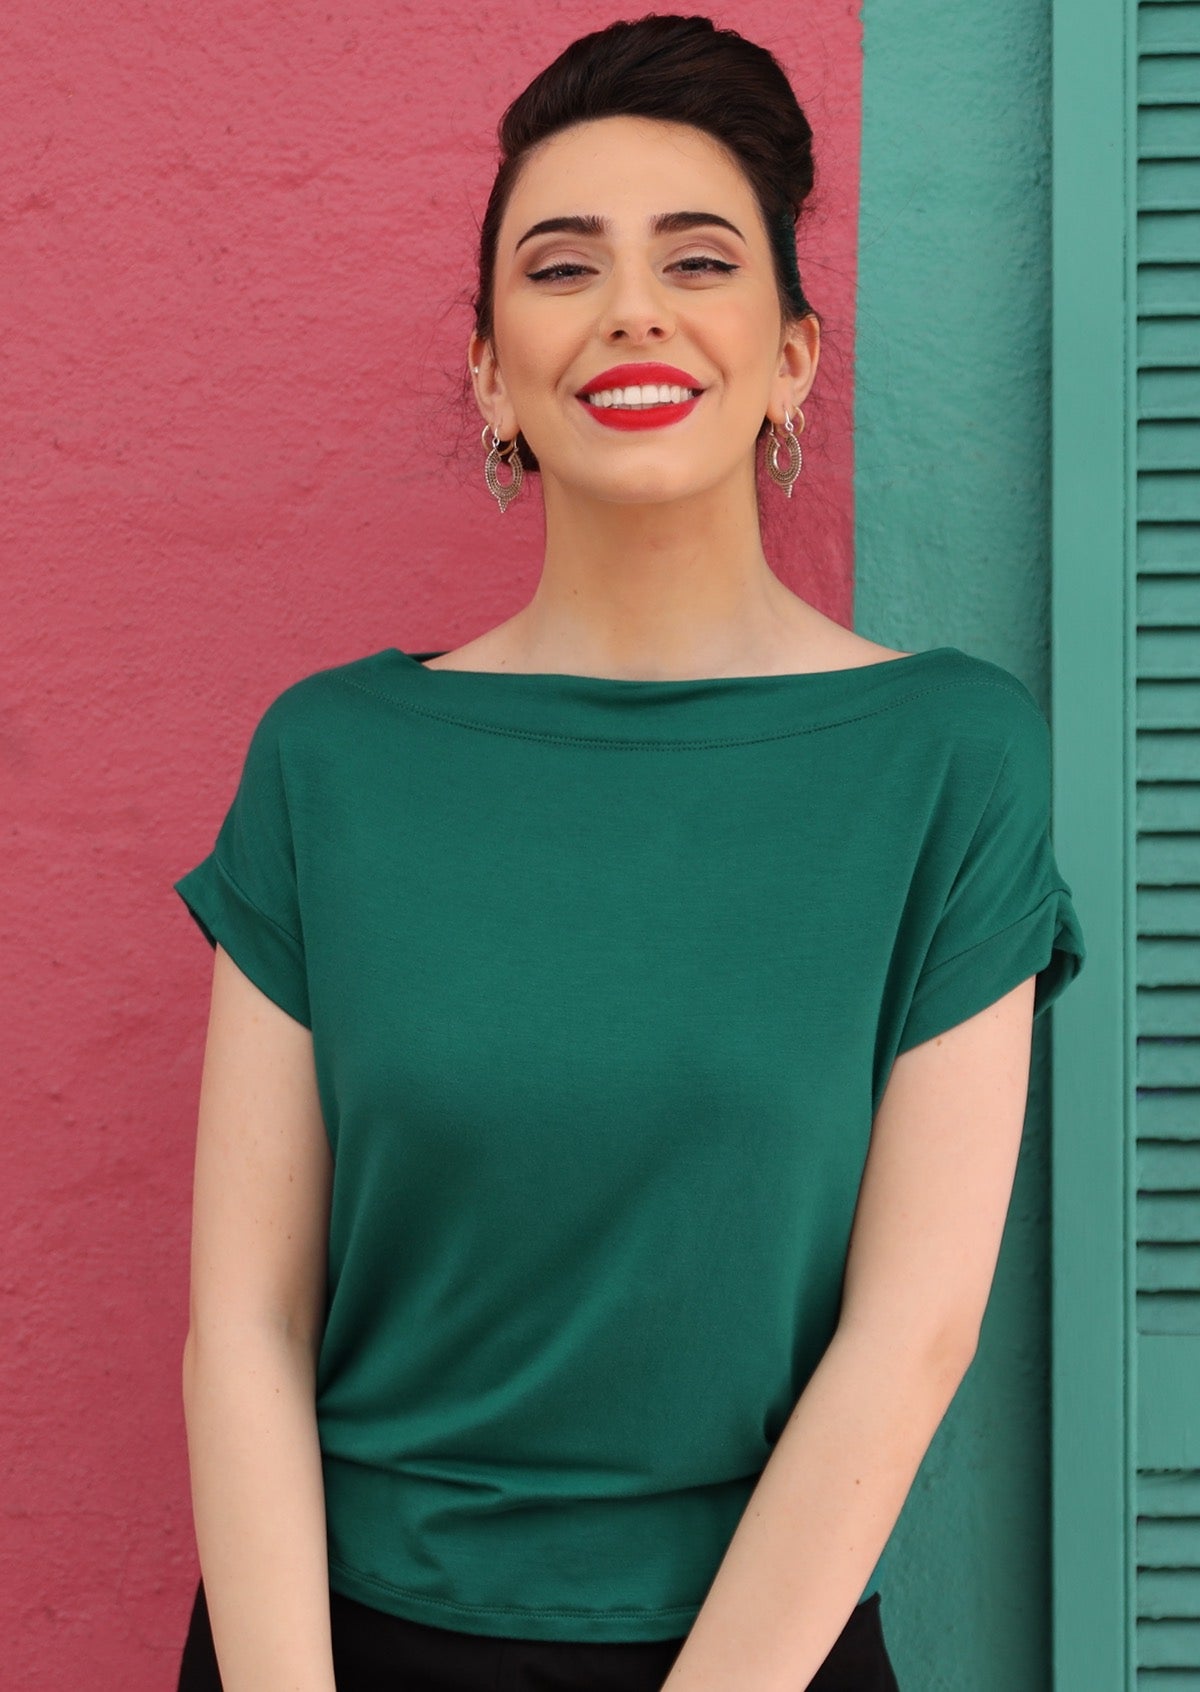 Woman with dark hair wearing a wide neck mod green stretch rayon boat neck top